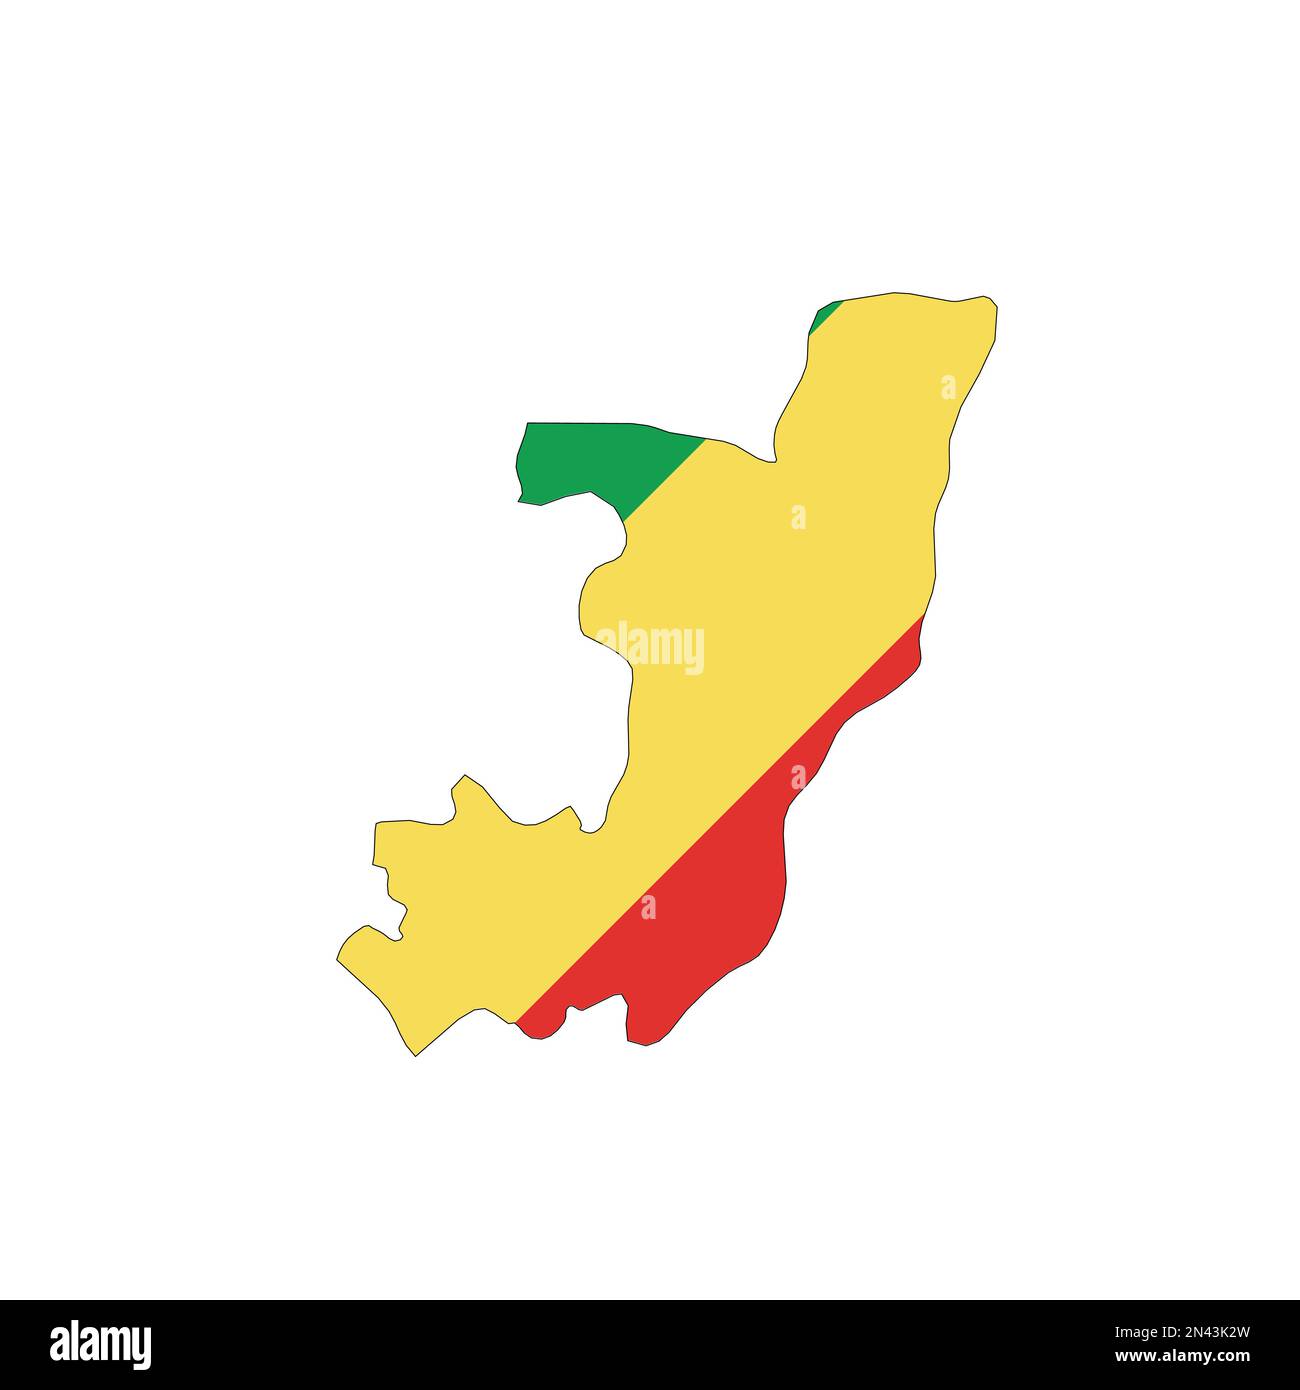 Republic of the Congo, former Zaire - national flag in a shape of country map silhouette with thin black outline. Simple flat vector icon. Stock Vector